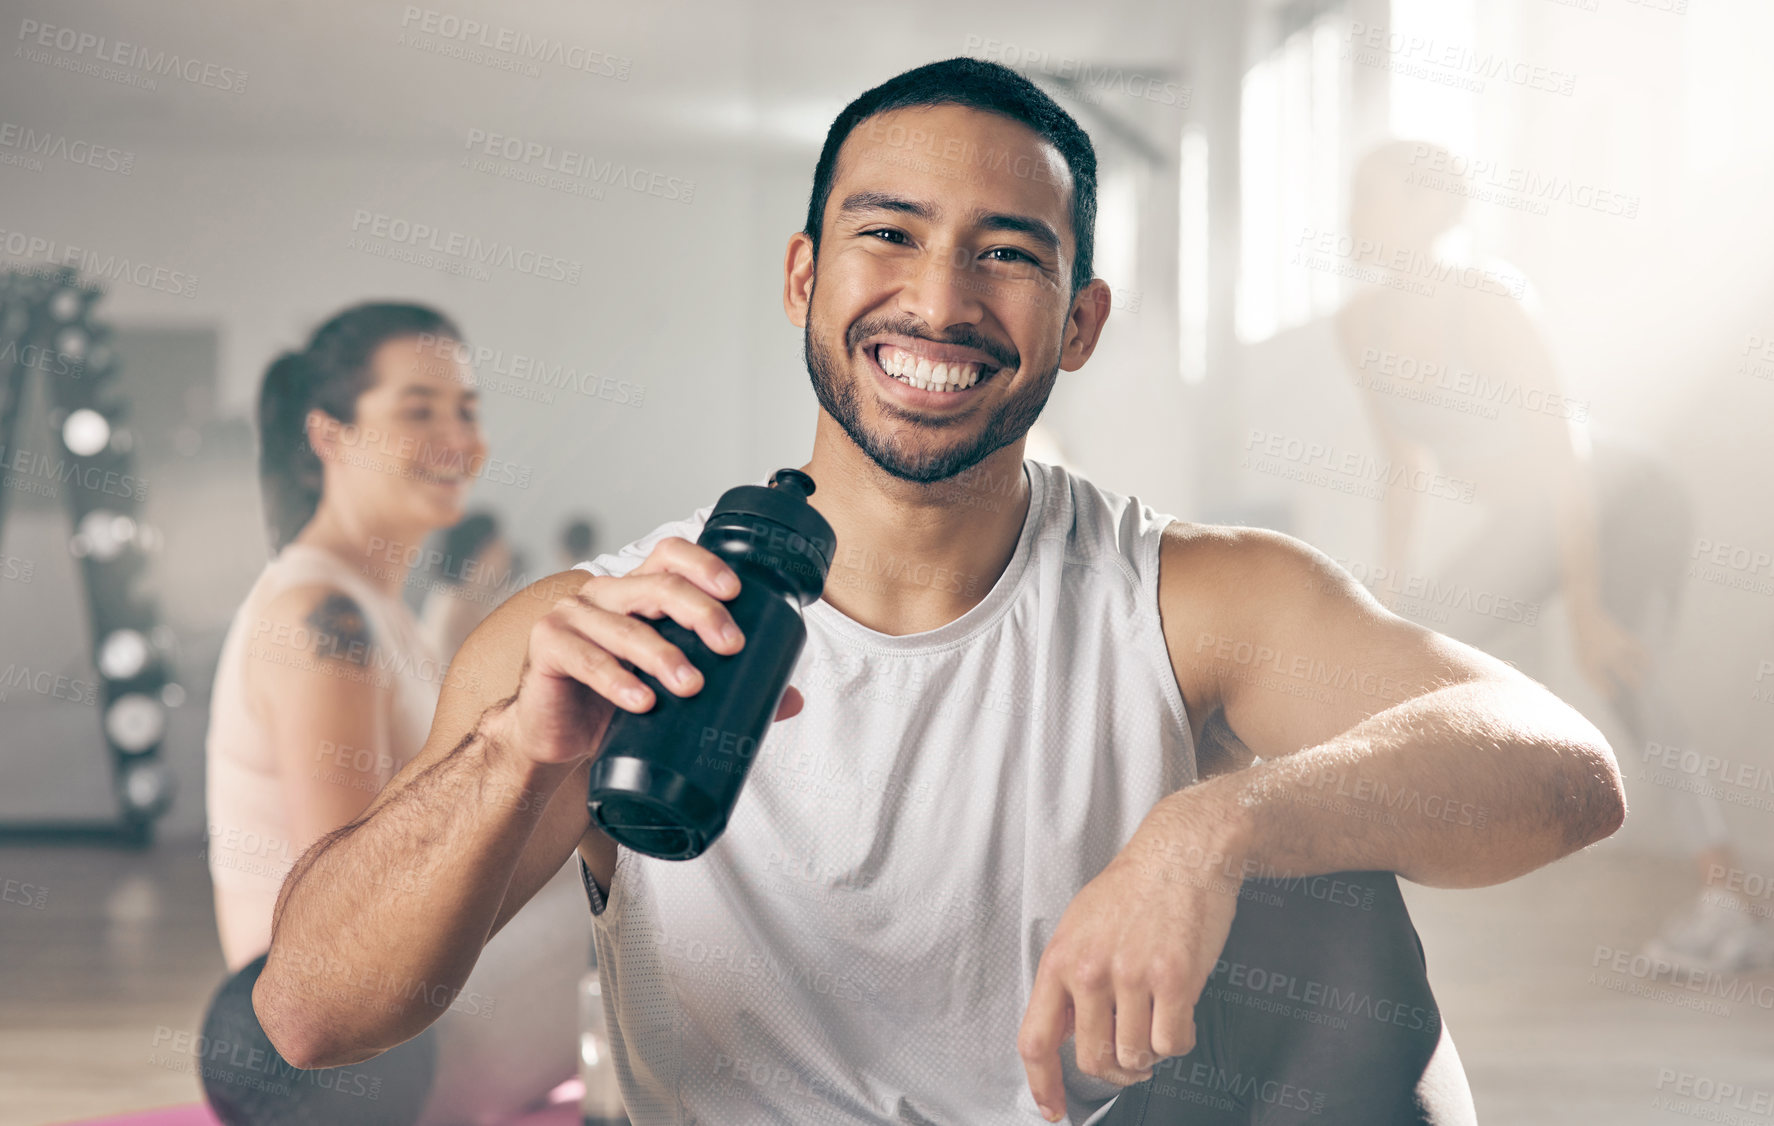 Buy stock photo Shot of a young male athlete drinking water while on a break at the gym